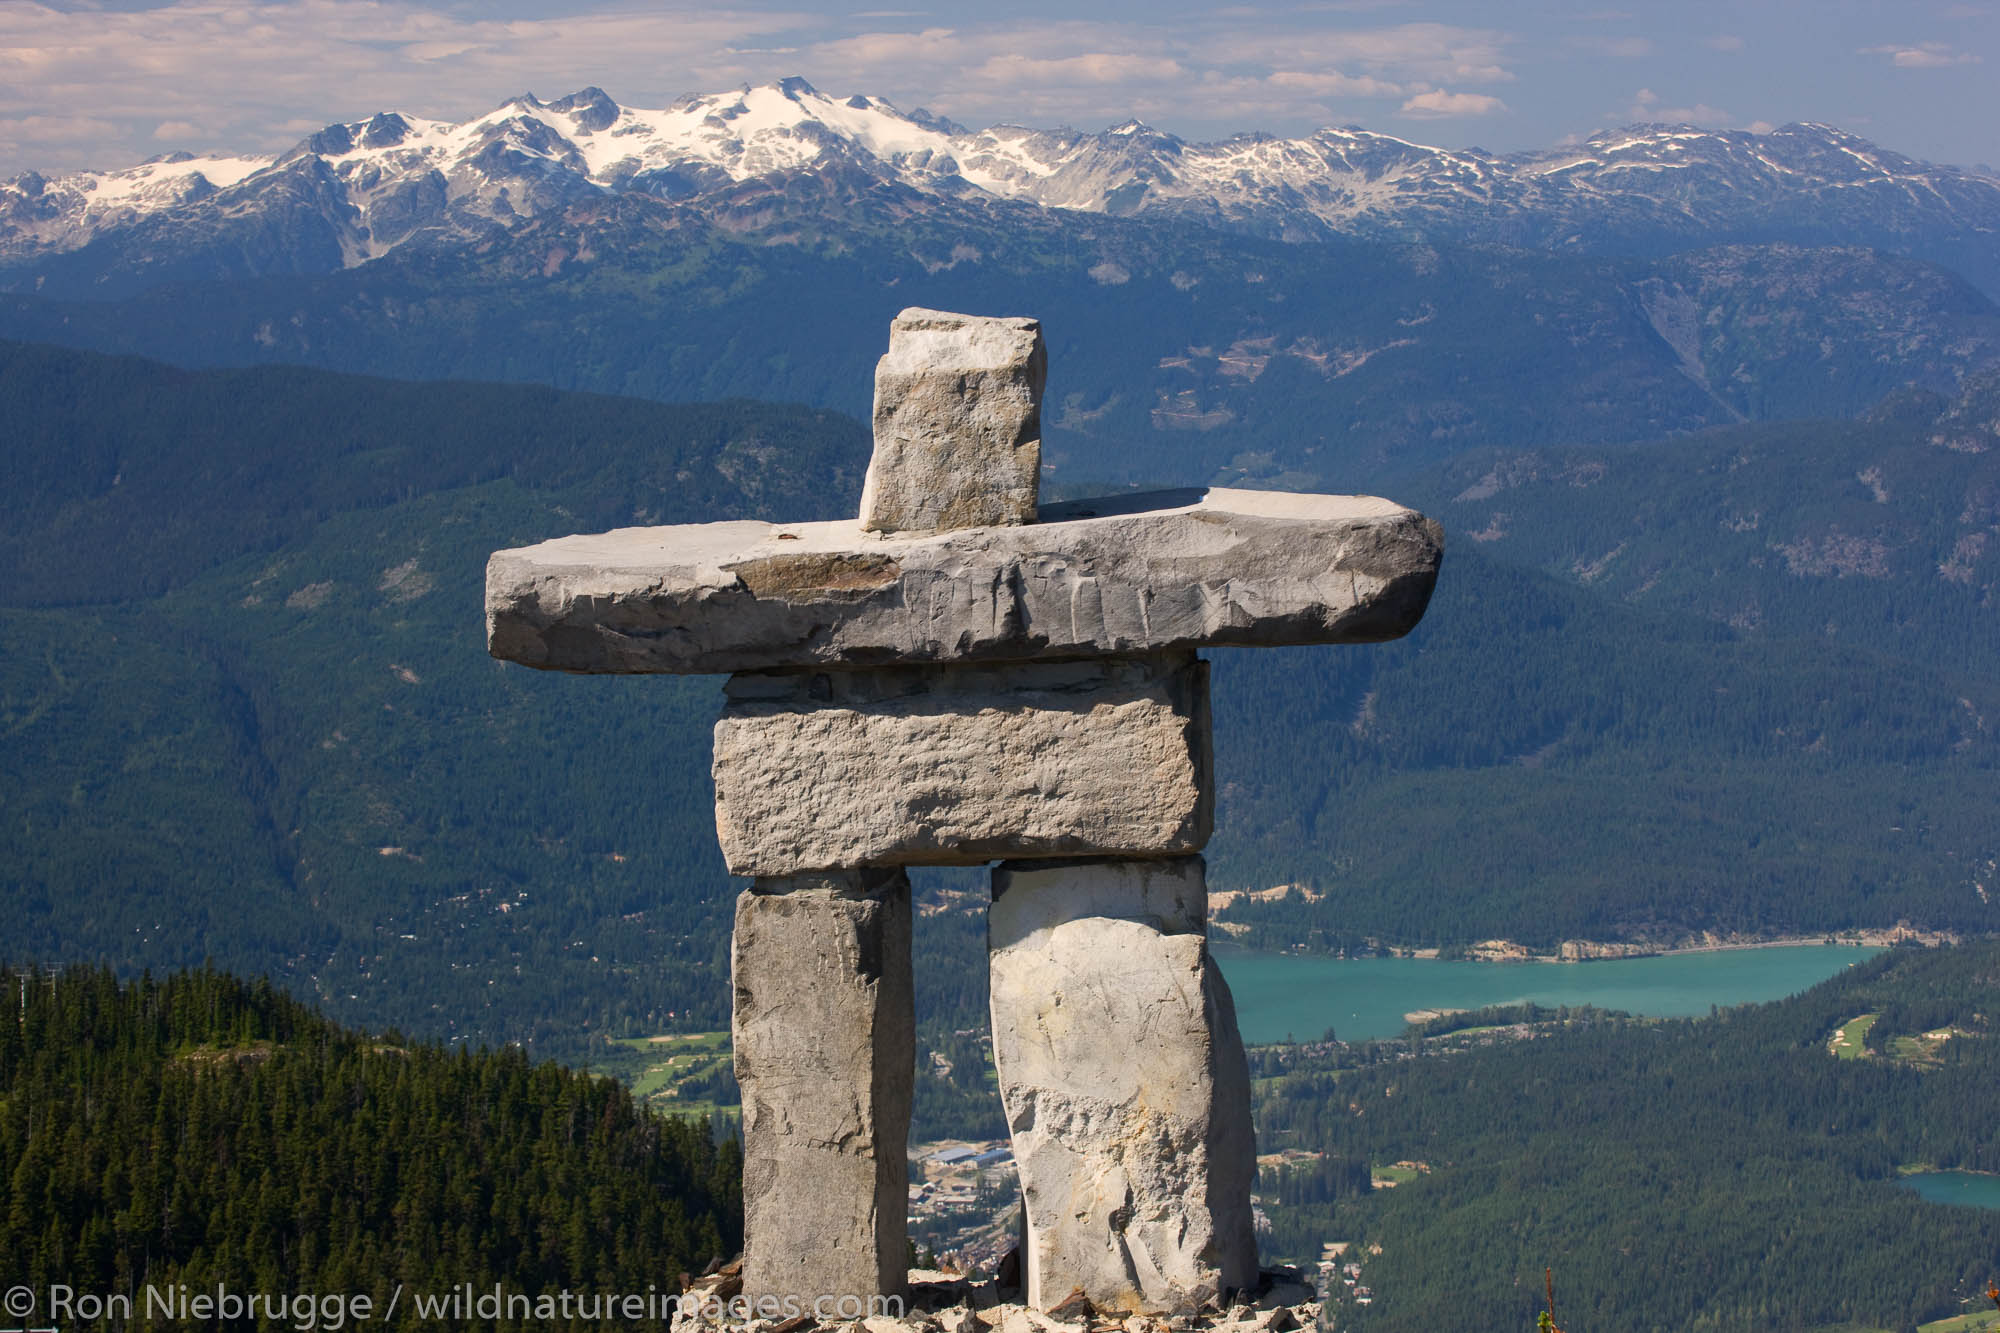 Inukshuk rock statue on Whistler Mountain is the Olympic symbol, Whistler, British Columbia, Canada.